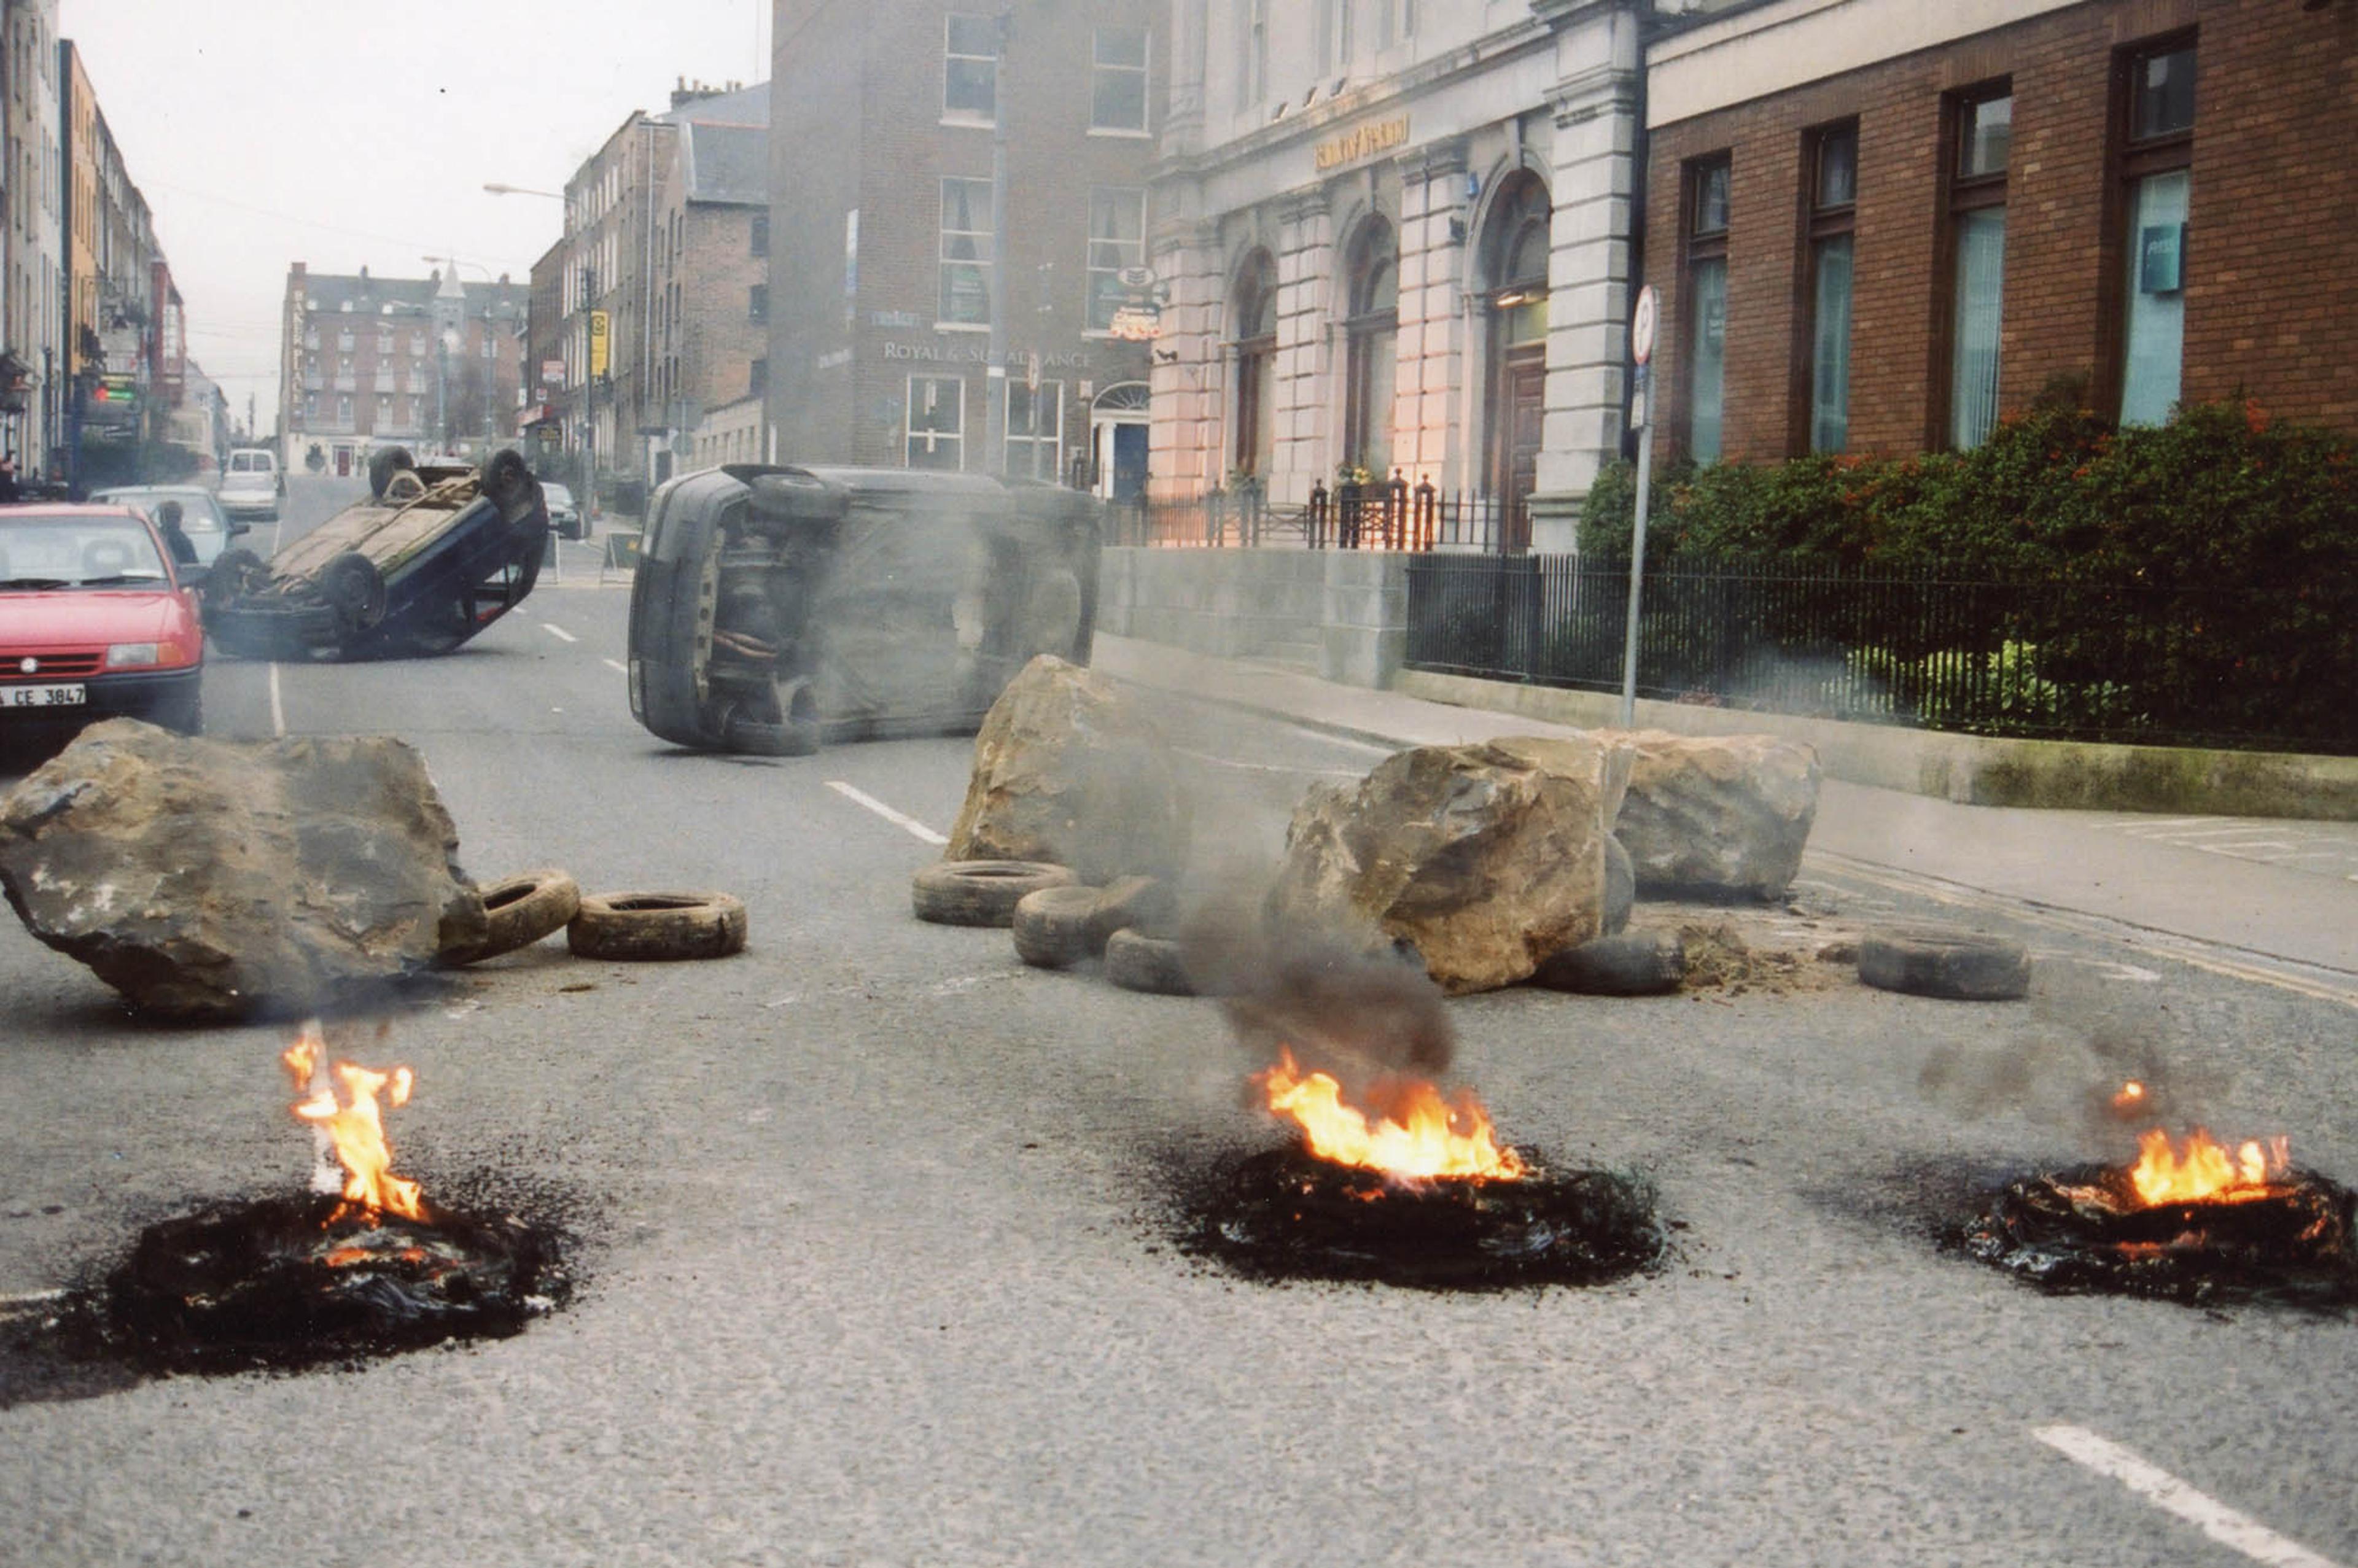 (2000) Santiago Sierra, Obstructed Street with Diverse Elements, 2000, performance.